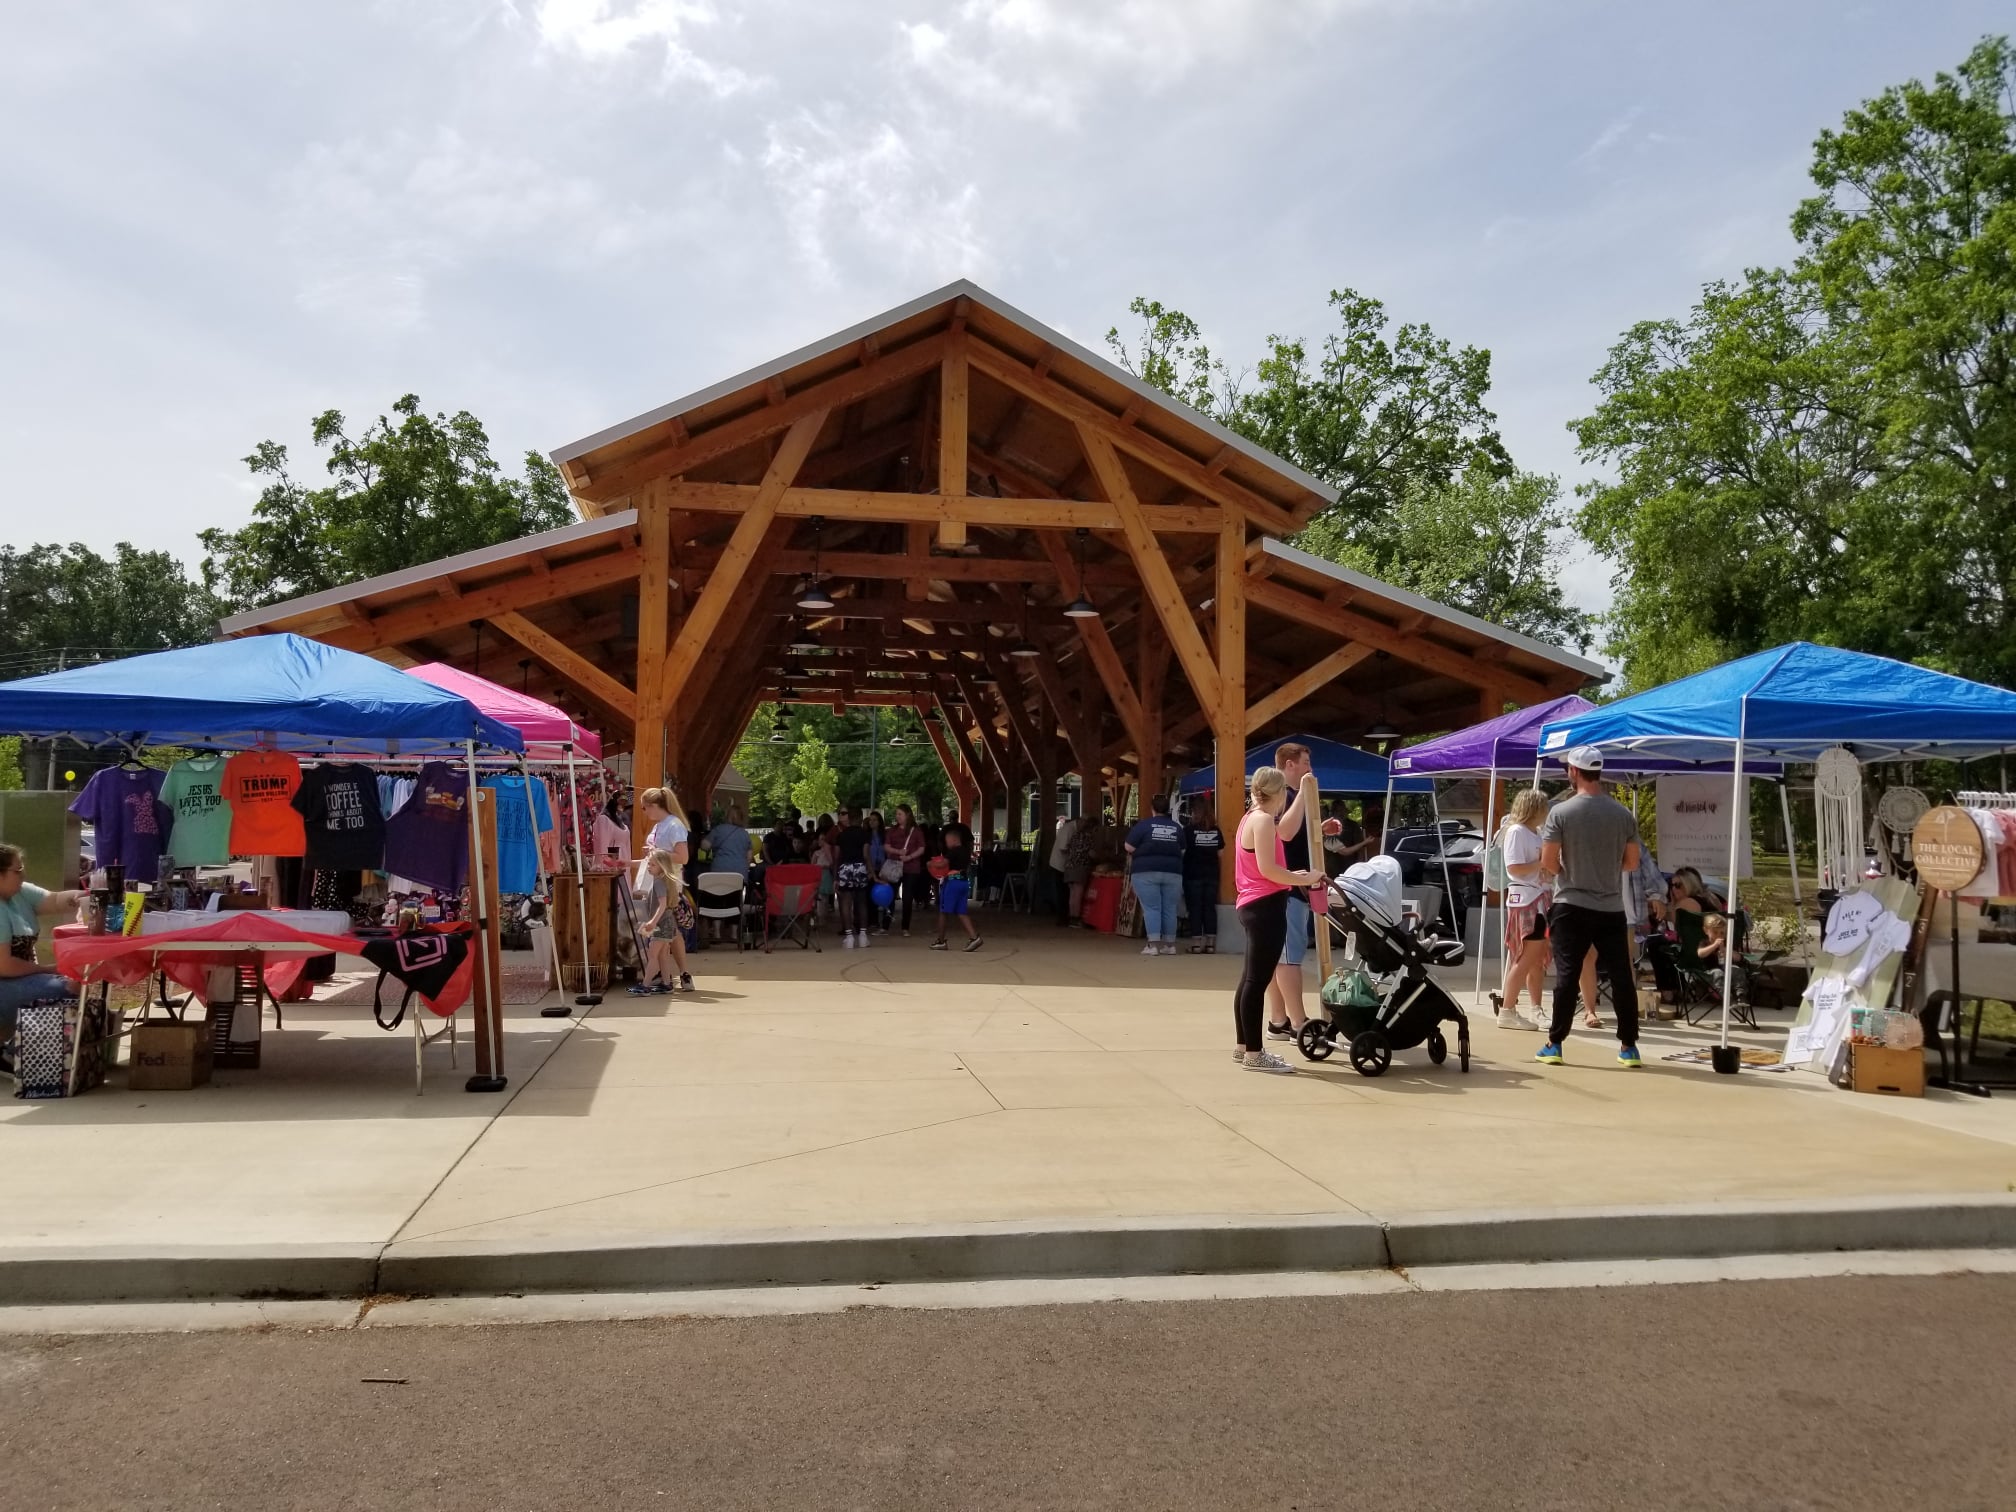 View of farmers market under wooden open-sided pavilion with blue tents on the sides with more vendors and people